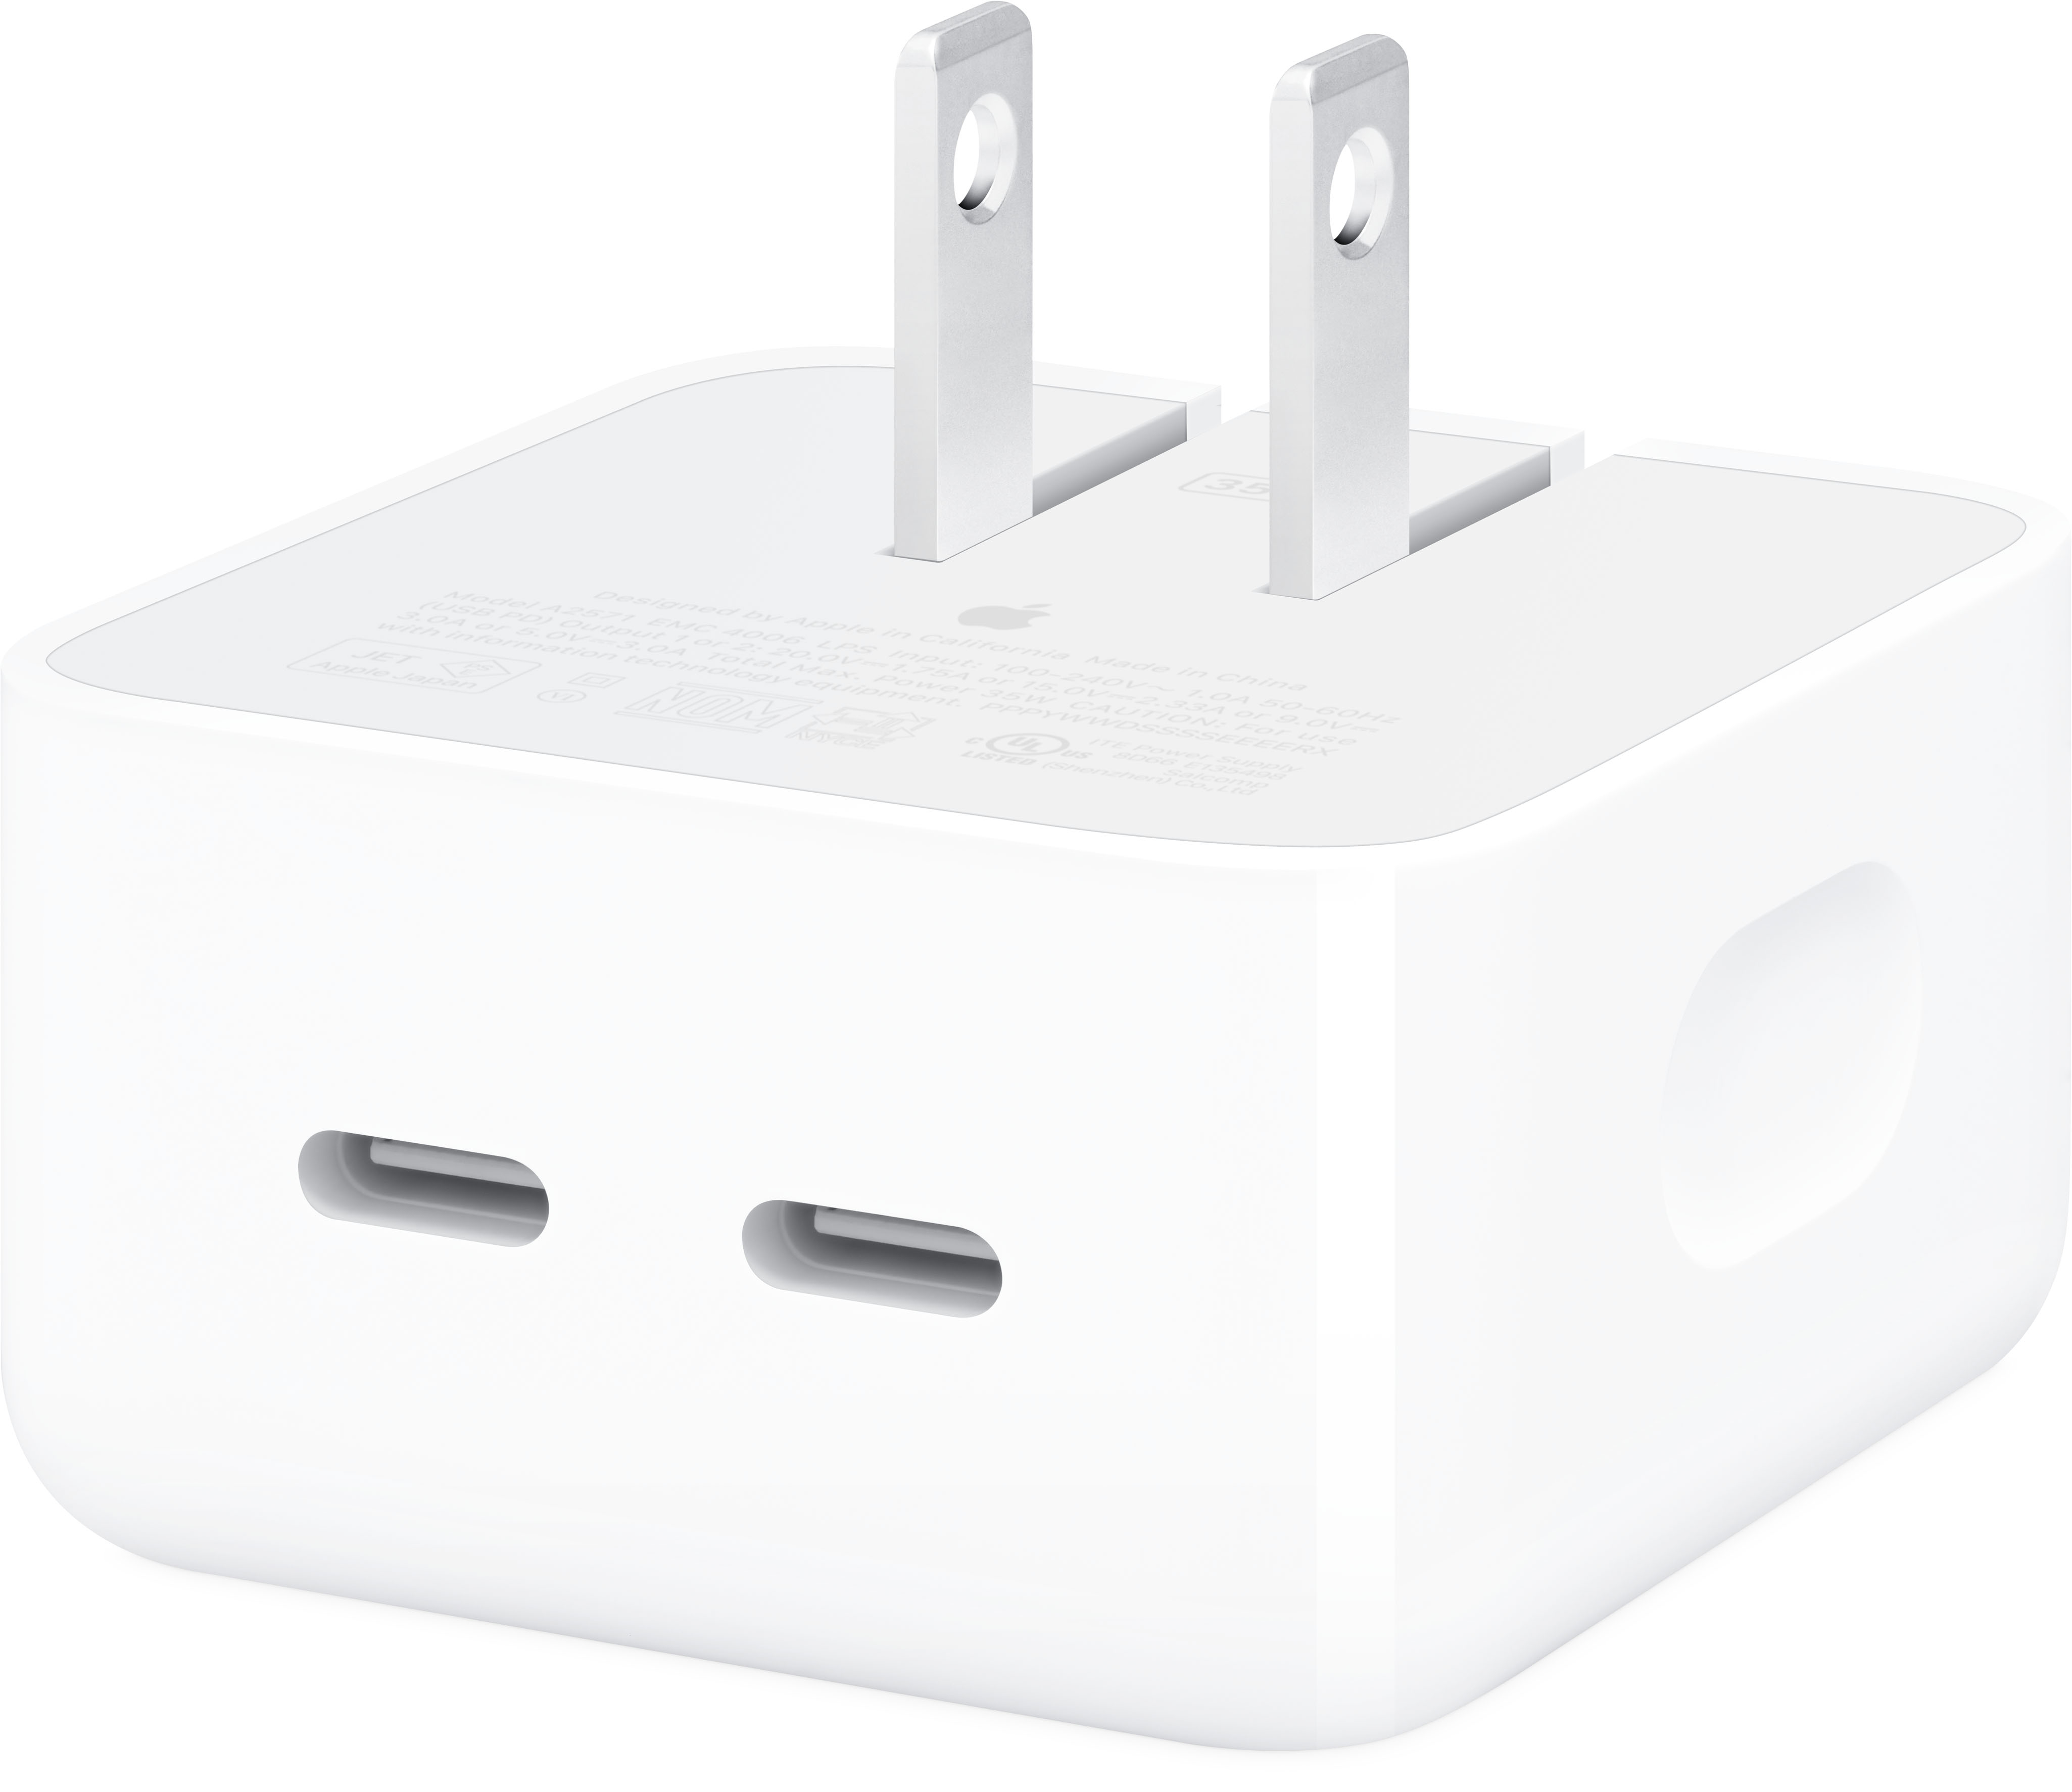 Retail Box Packing White Dual Port USB Wall Charger Adapter, For